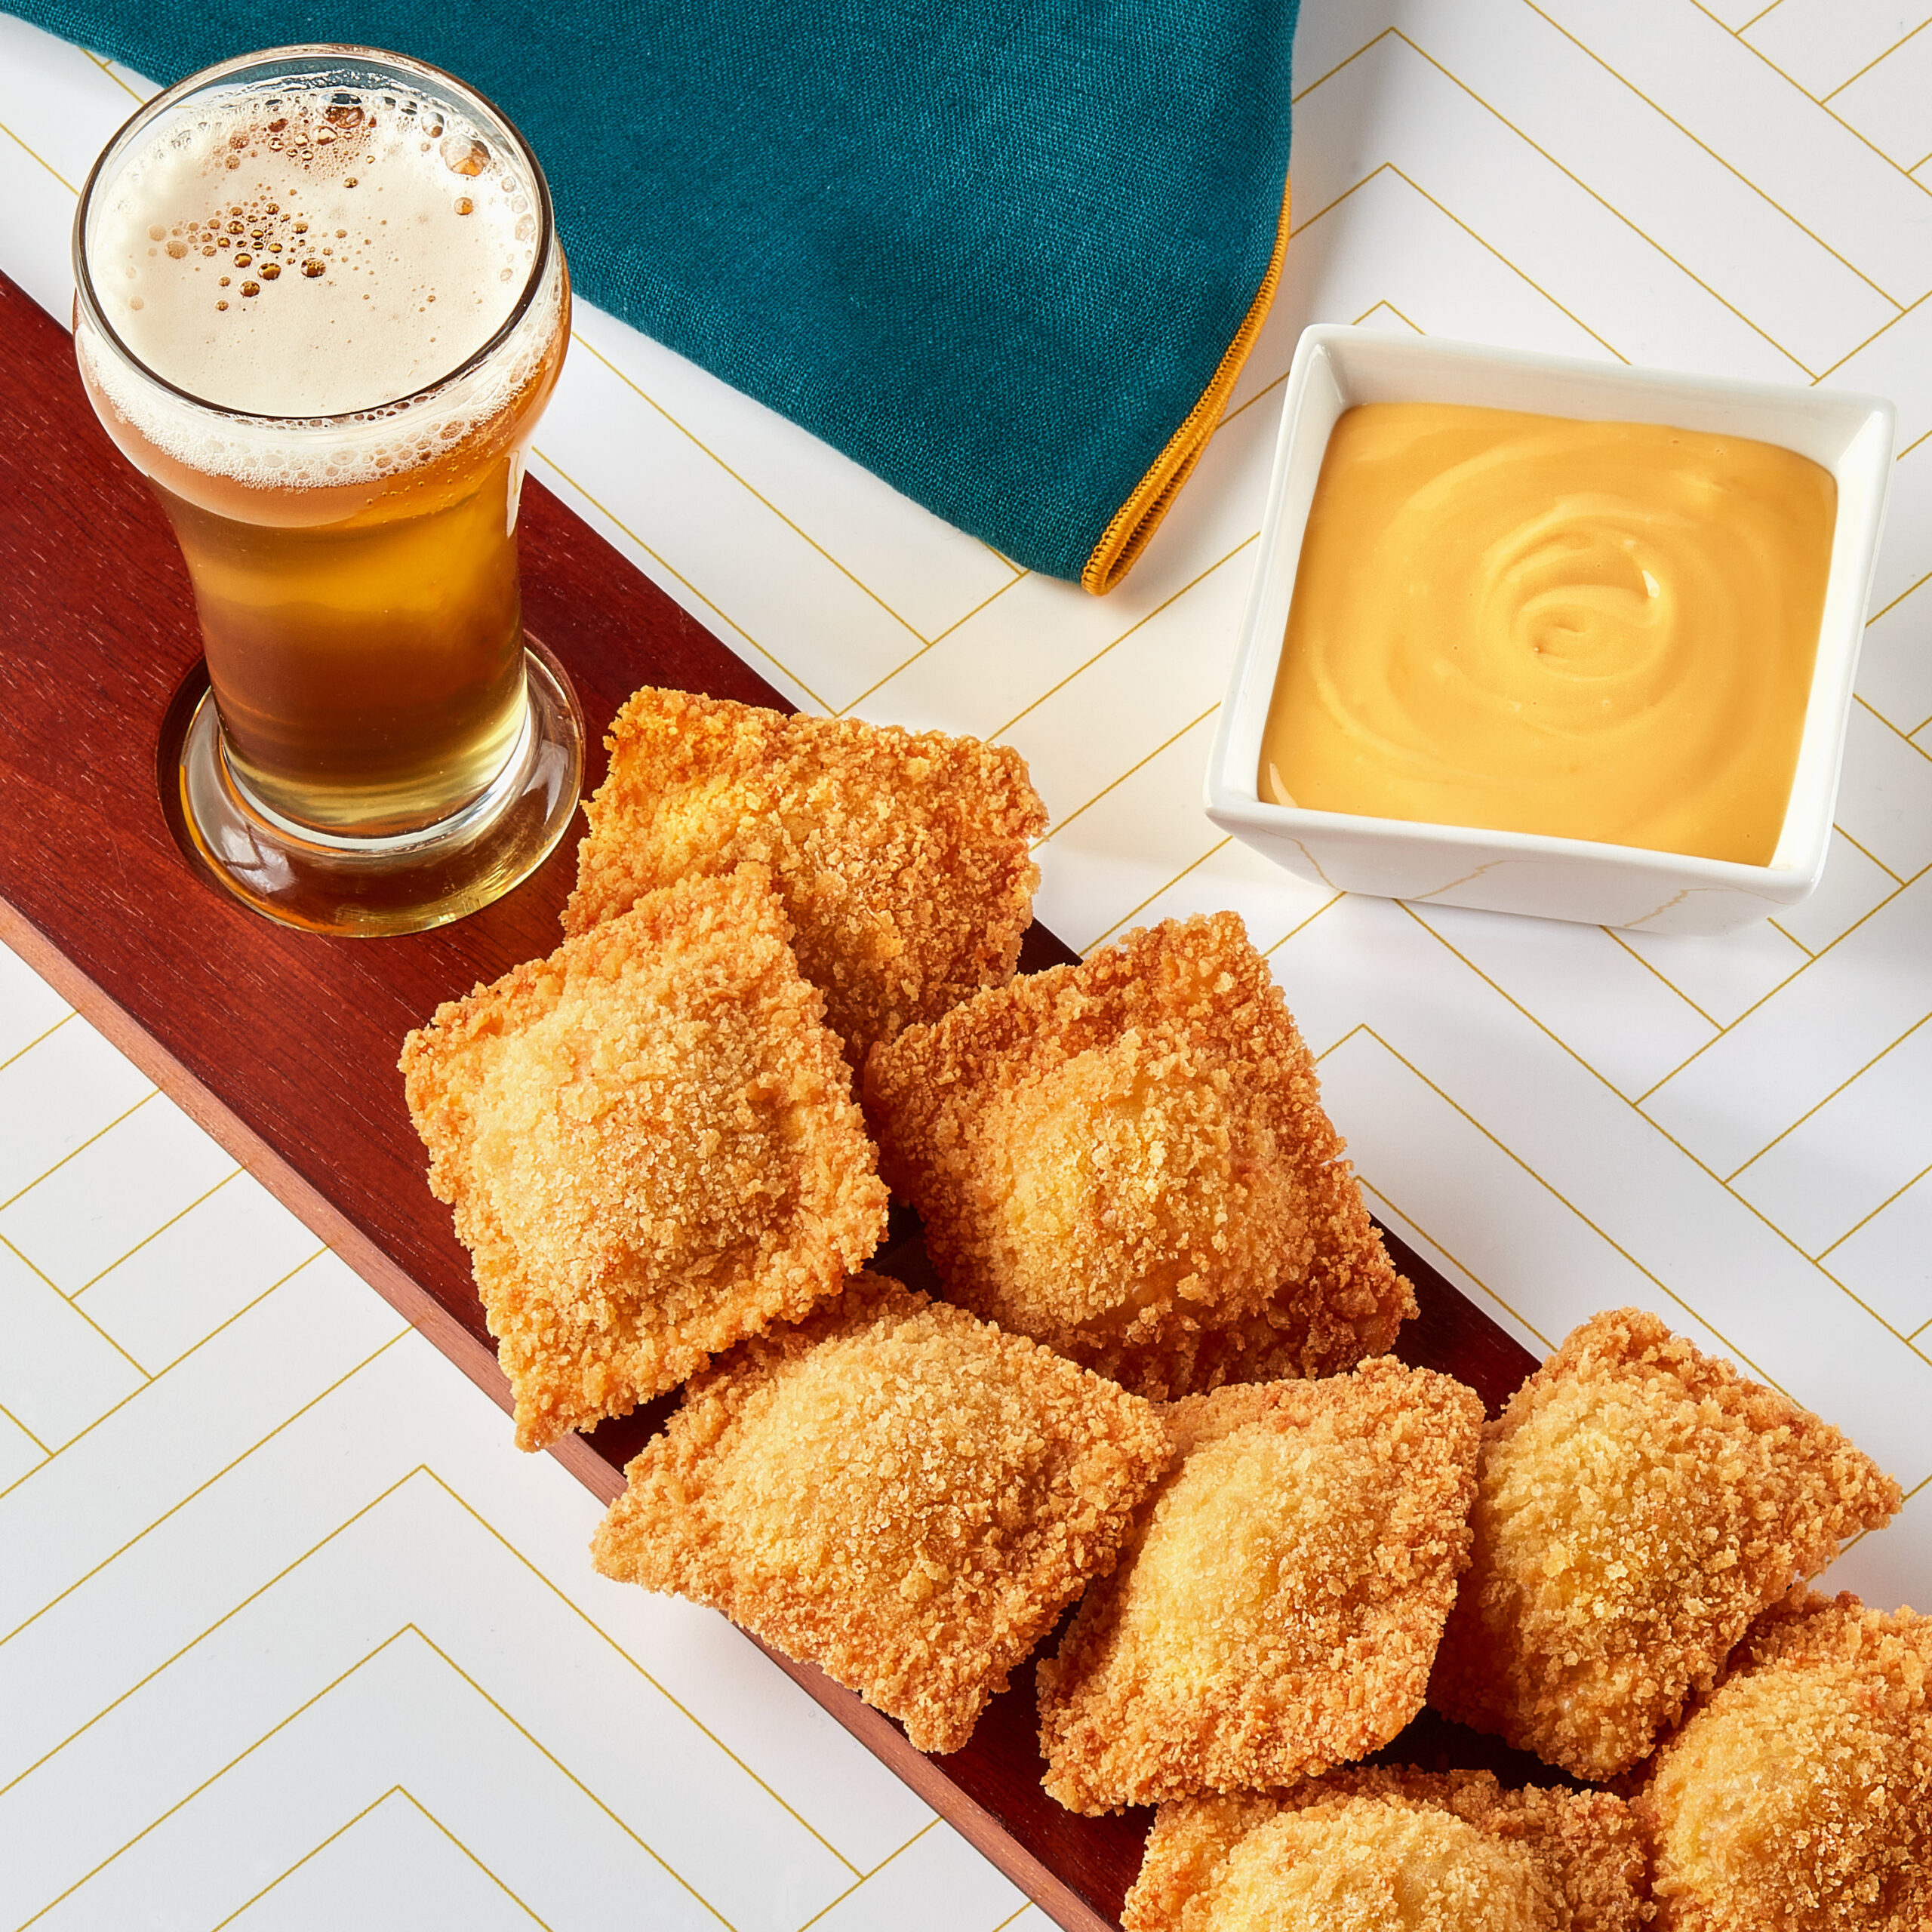 Fried Buffalo Chicken Ravioli with Beer Dipping Sauce